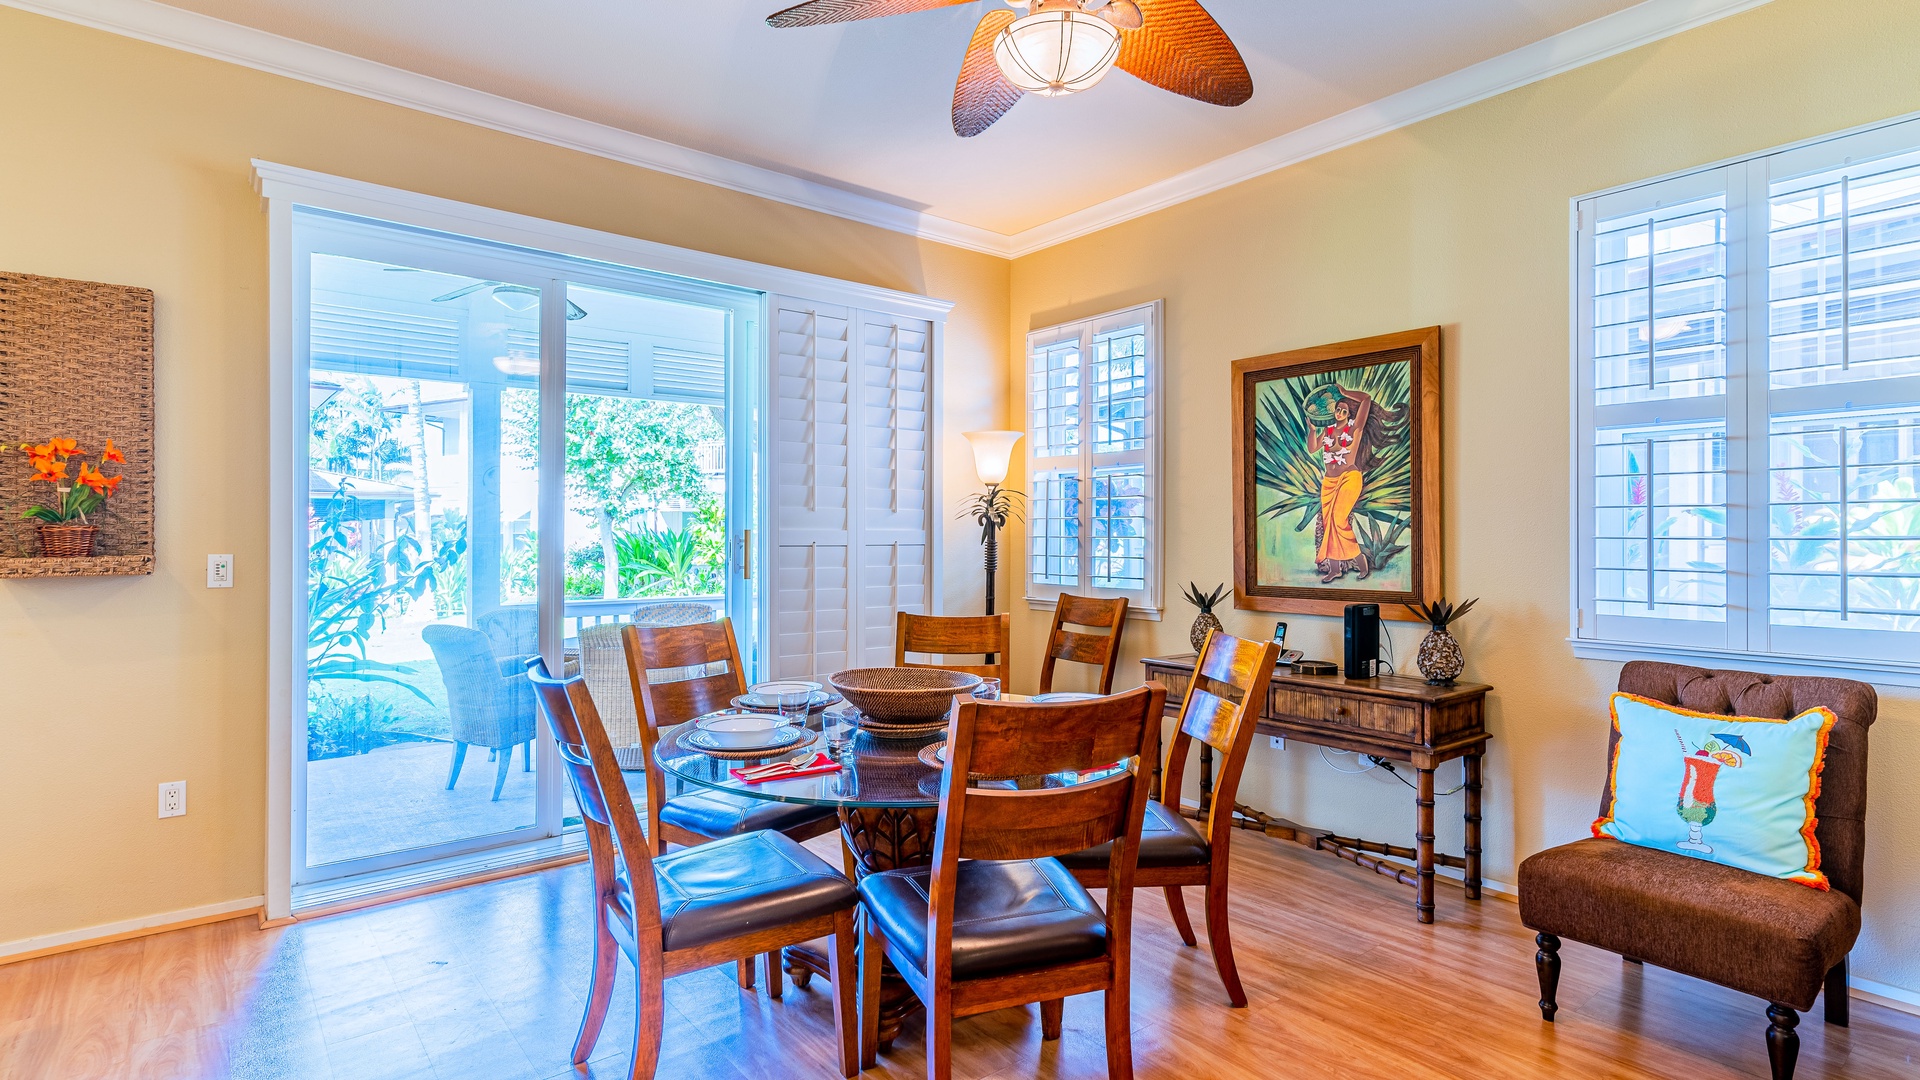 Kapolei Vacation Rentals, Coconut Plantation 1174-2 - Plenty of seating and a breathtaking view for game night.